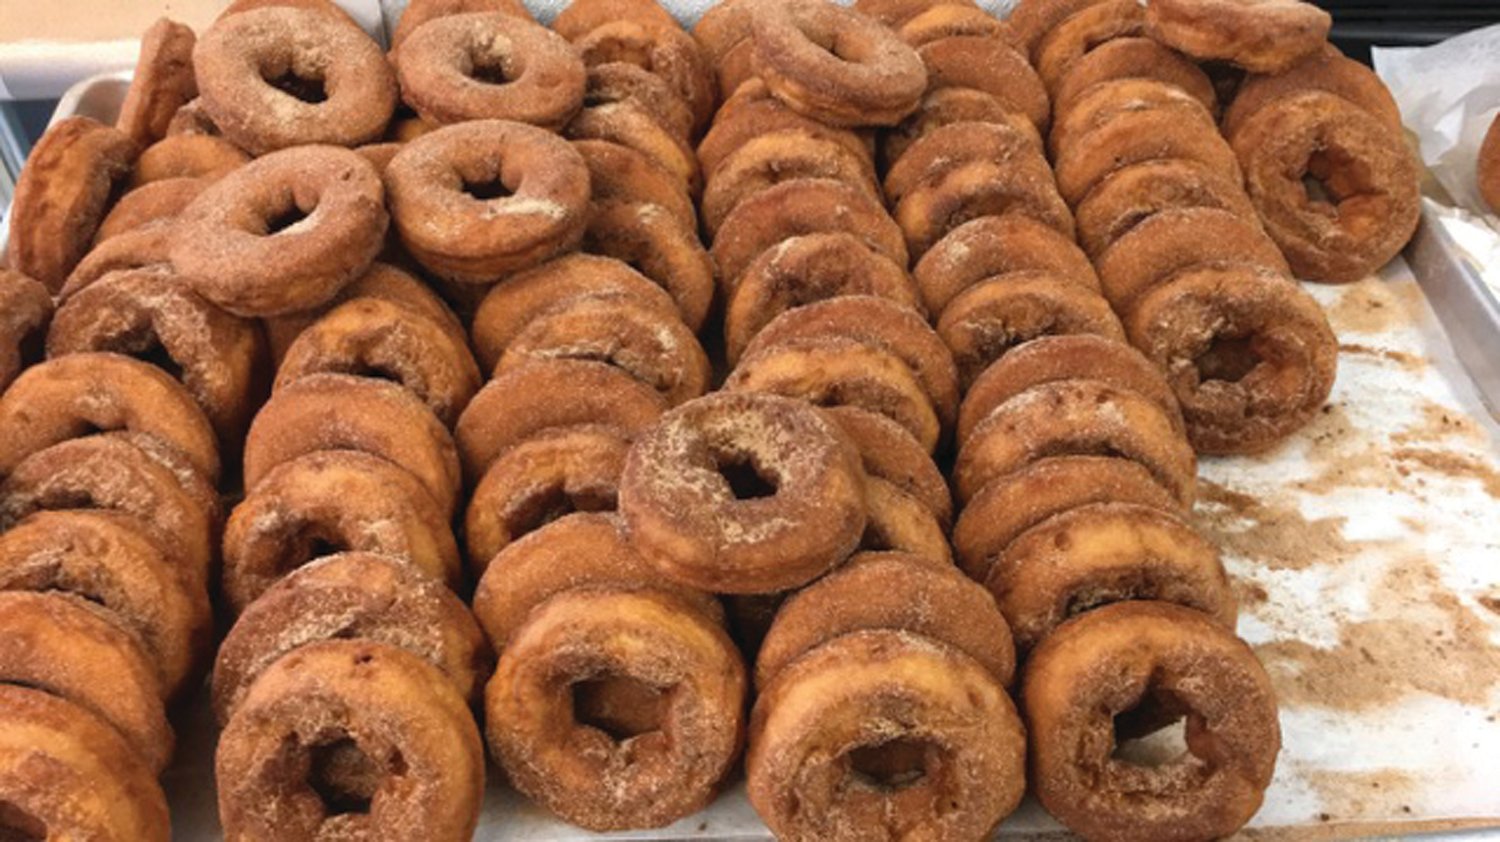 CIDER DONUTS RULE: Appleland makes and sells fresh apple cider donuts and apple dumplings, gourmet chocolate covered candy apples and more. They will be bringing their tasty treats to this year’s Johnston Apple Festival.